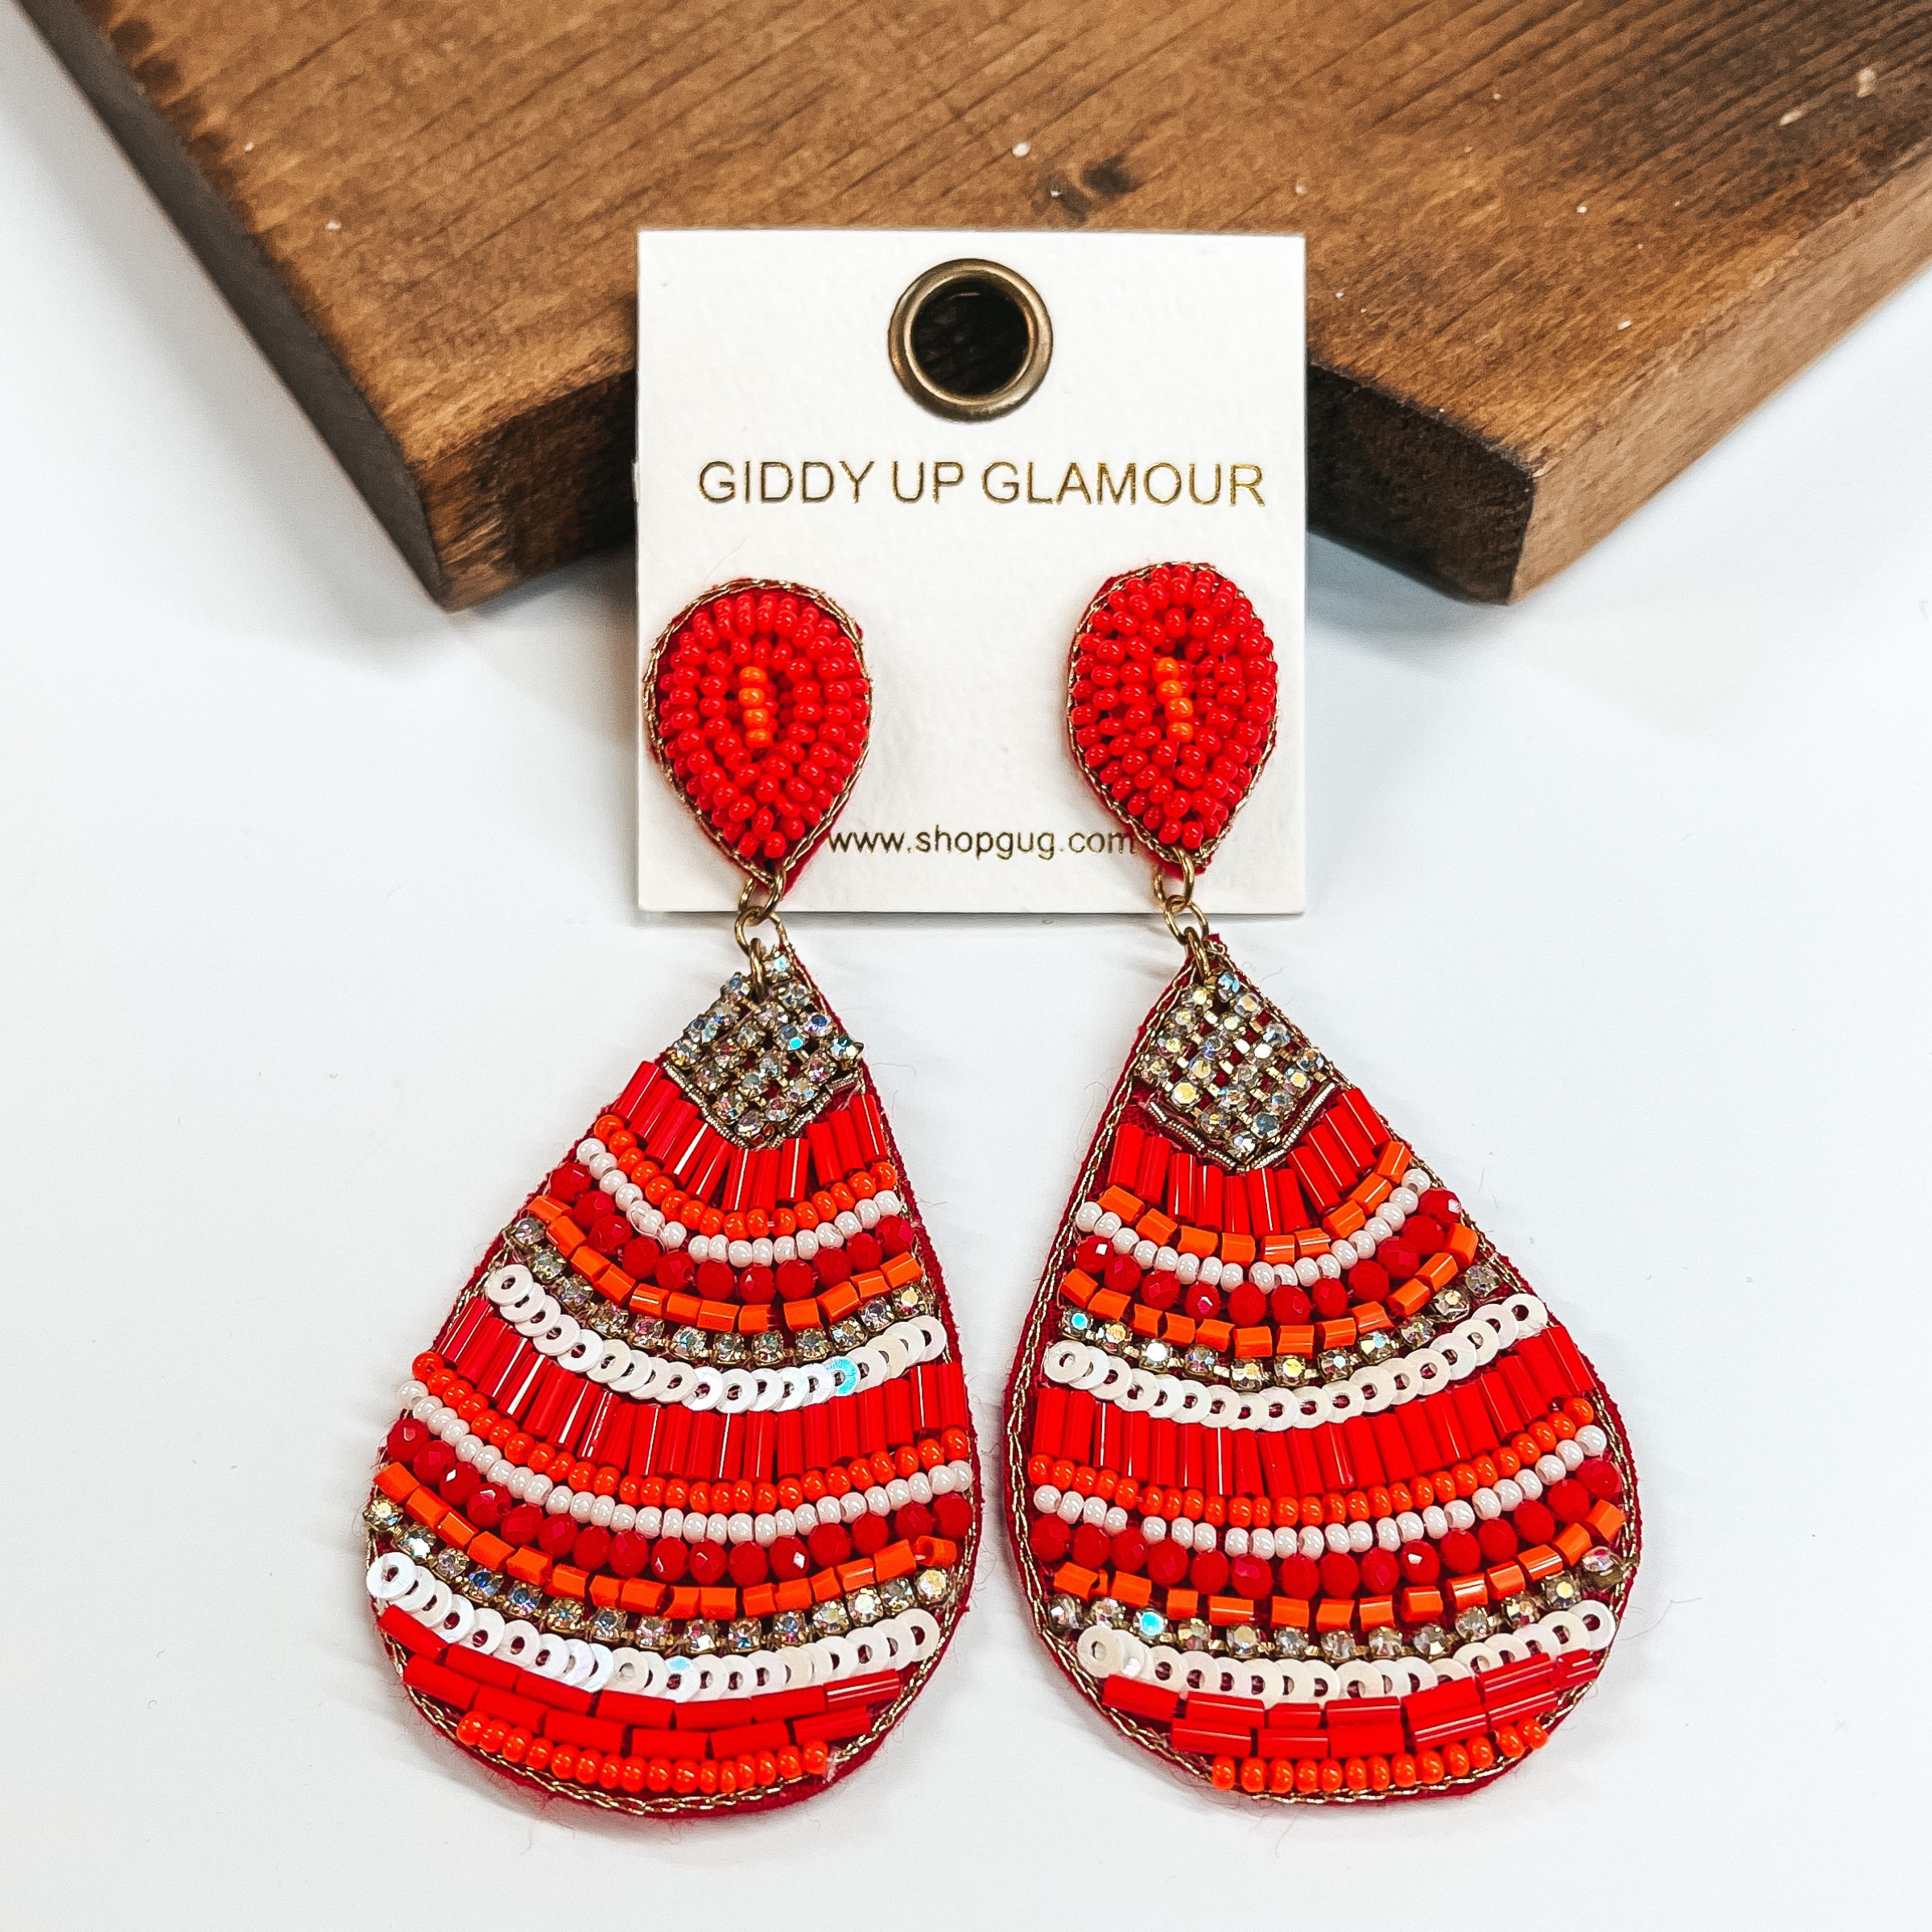 These are red teardrop earrings with a mix  of beads and crystals. There is a mix of different  sizes and colors of beads such as orange, red, and  white. There are also sequins and crystals. These  earrings are taken on a white background and leaned  up against a brown block.